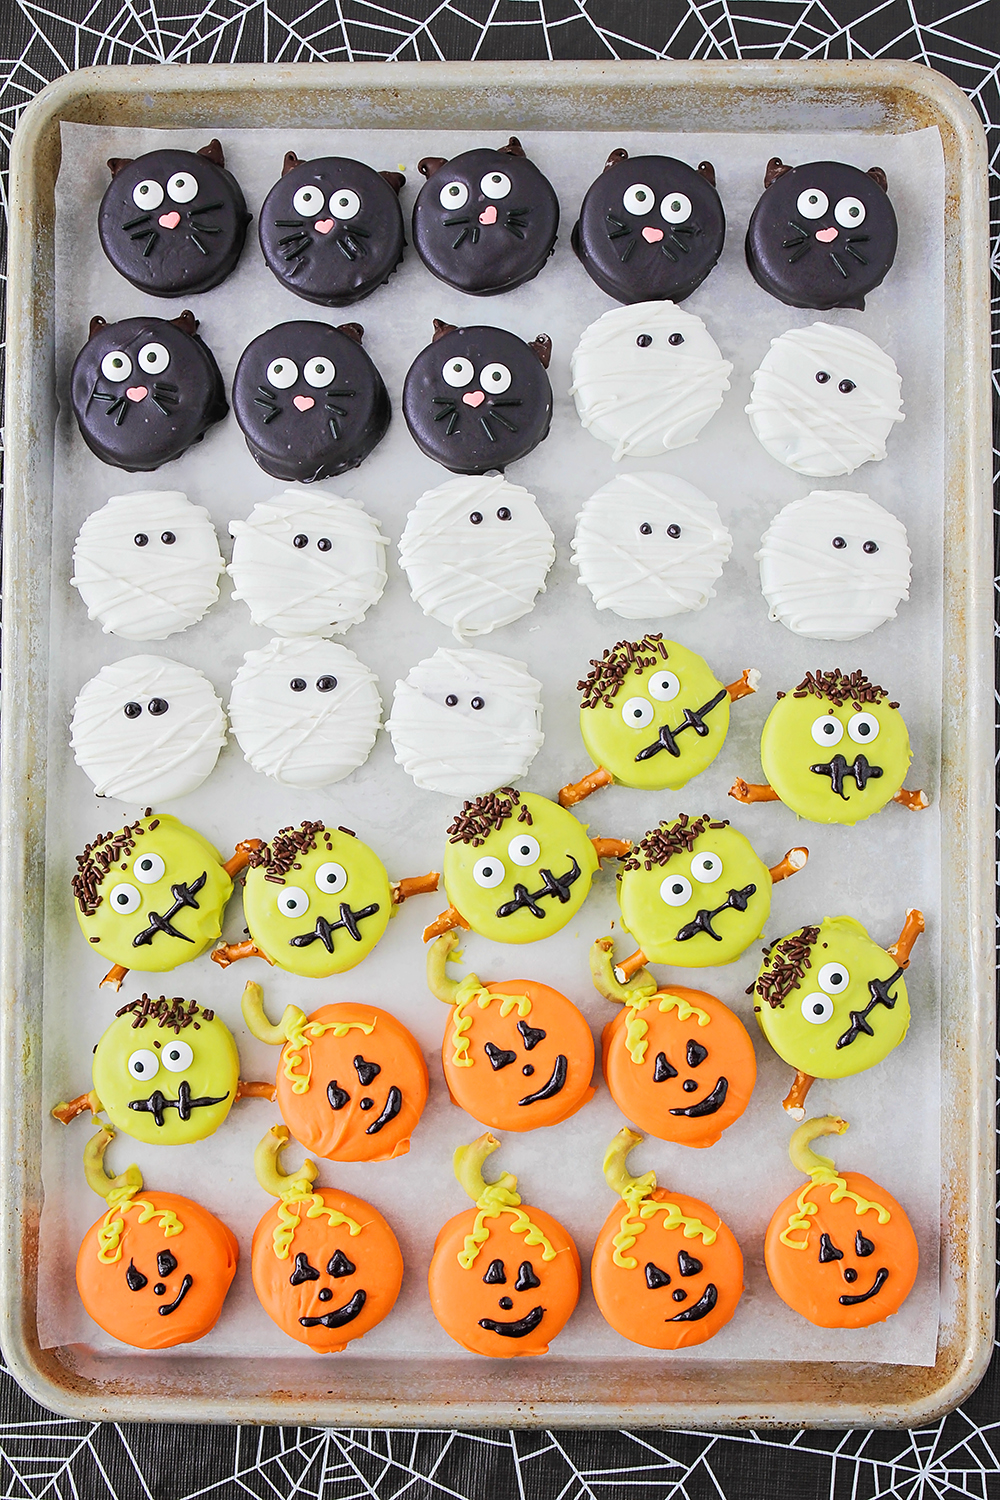 These adorable and delicious Halloween Oreos are so fun to decorate!